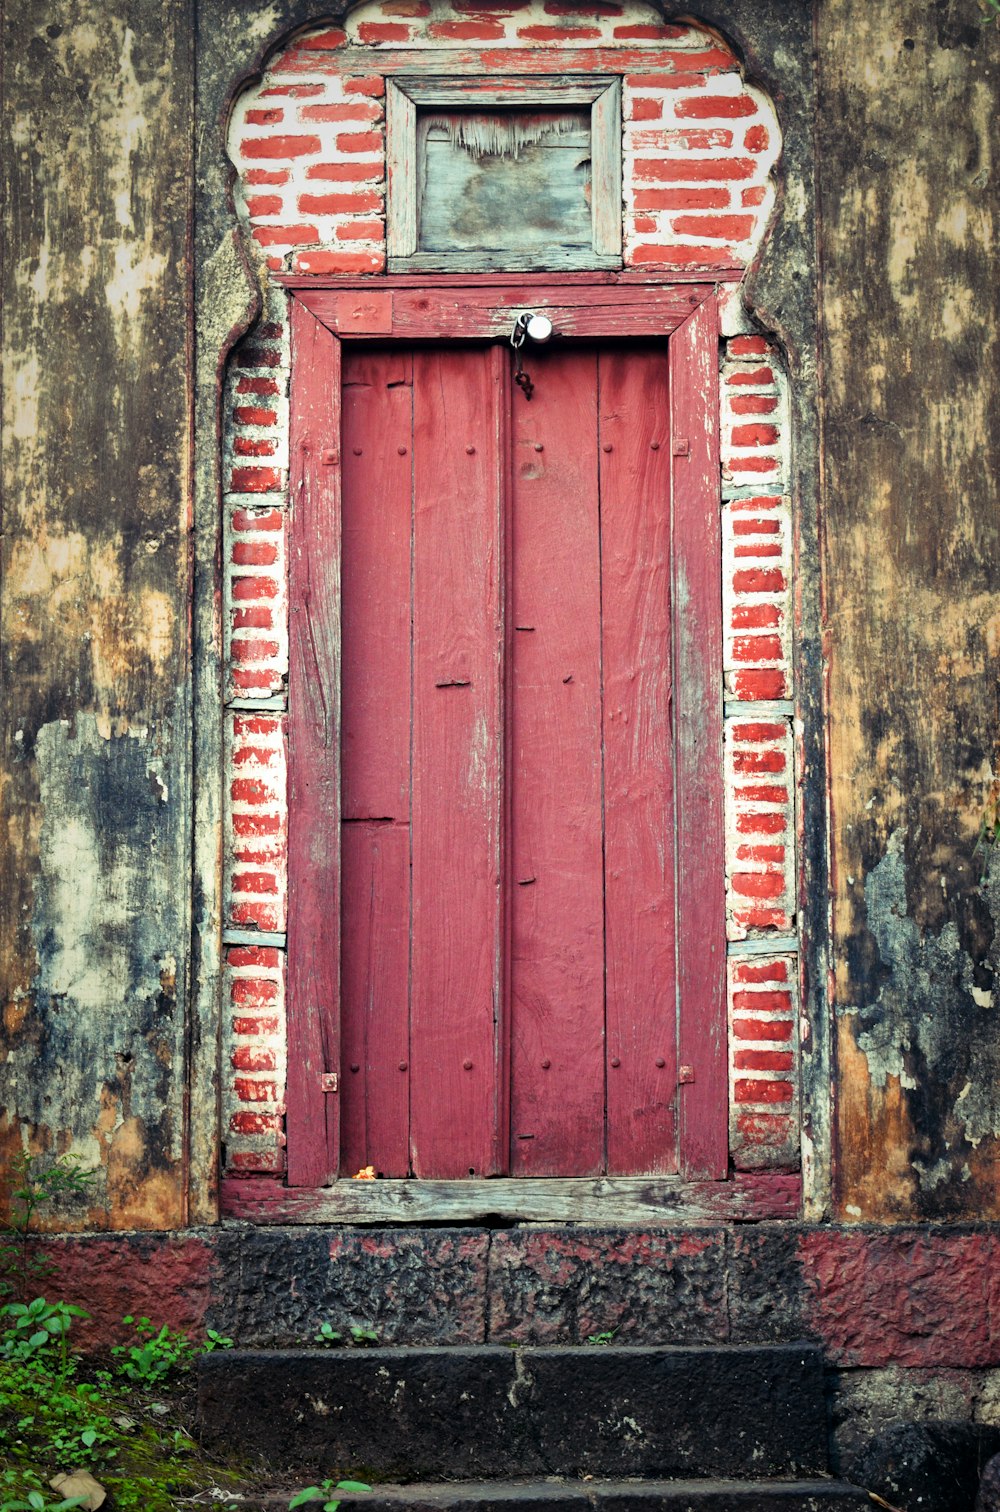 a red door on a building